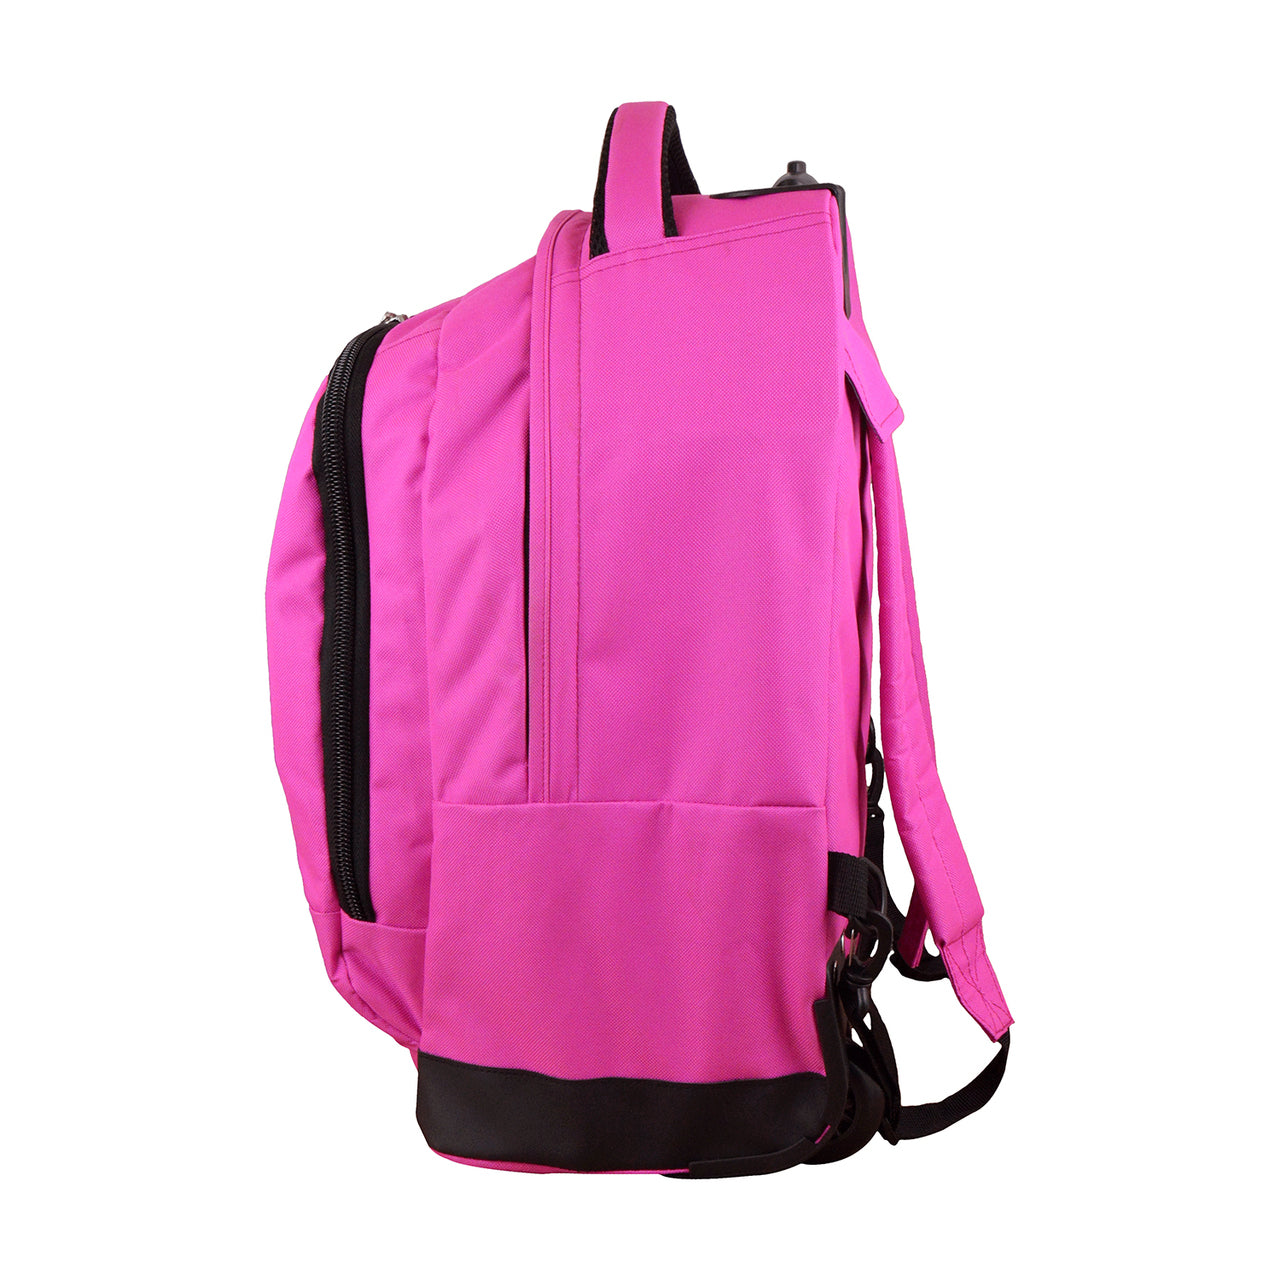 Cleveland Browns Premium Wheeled Backpack in Pink